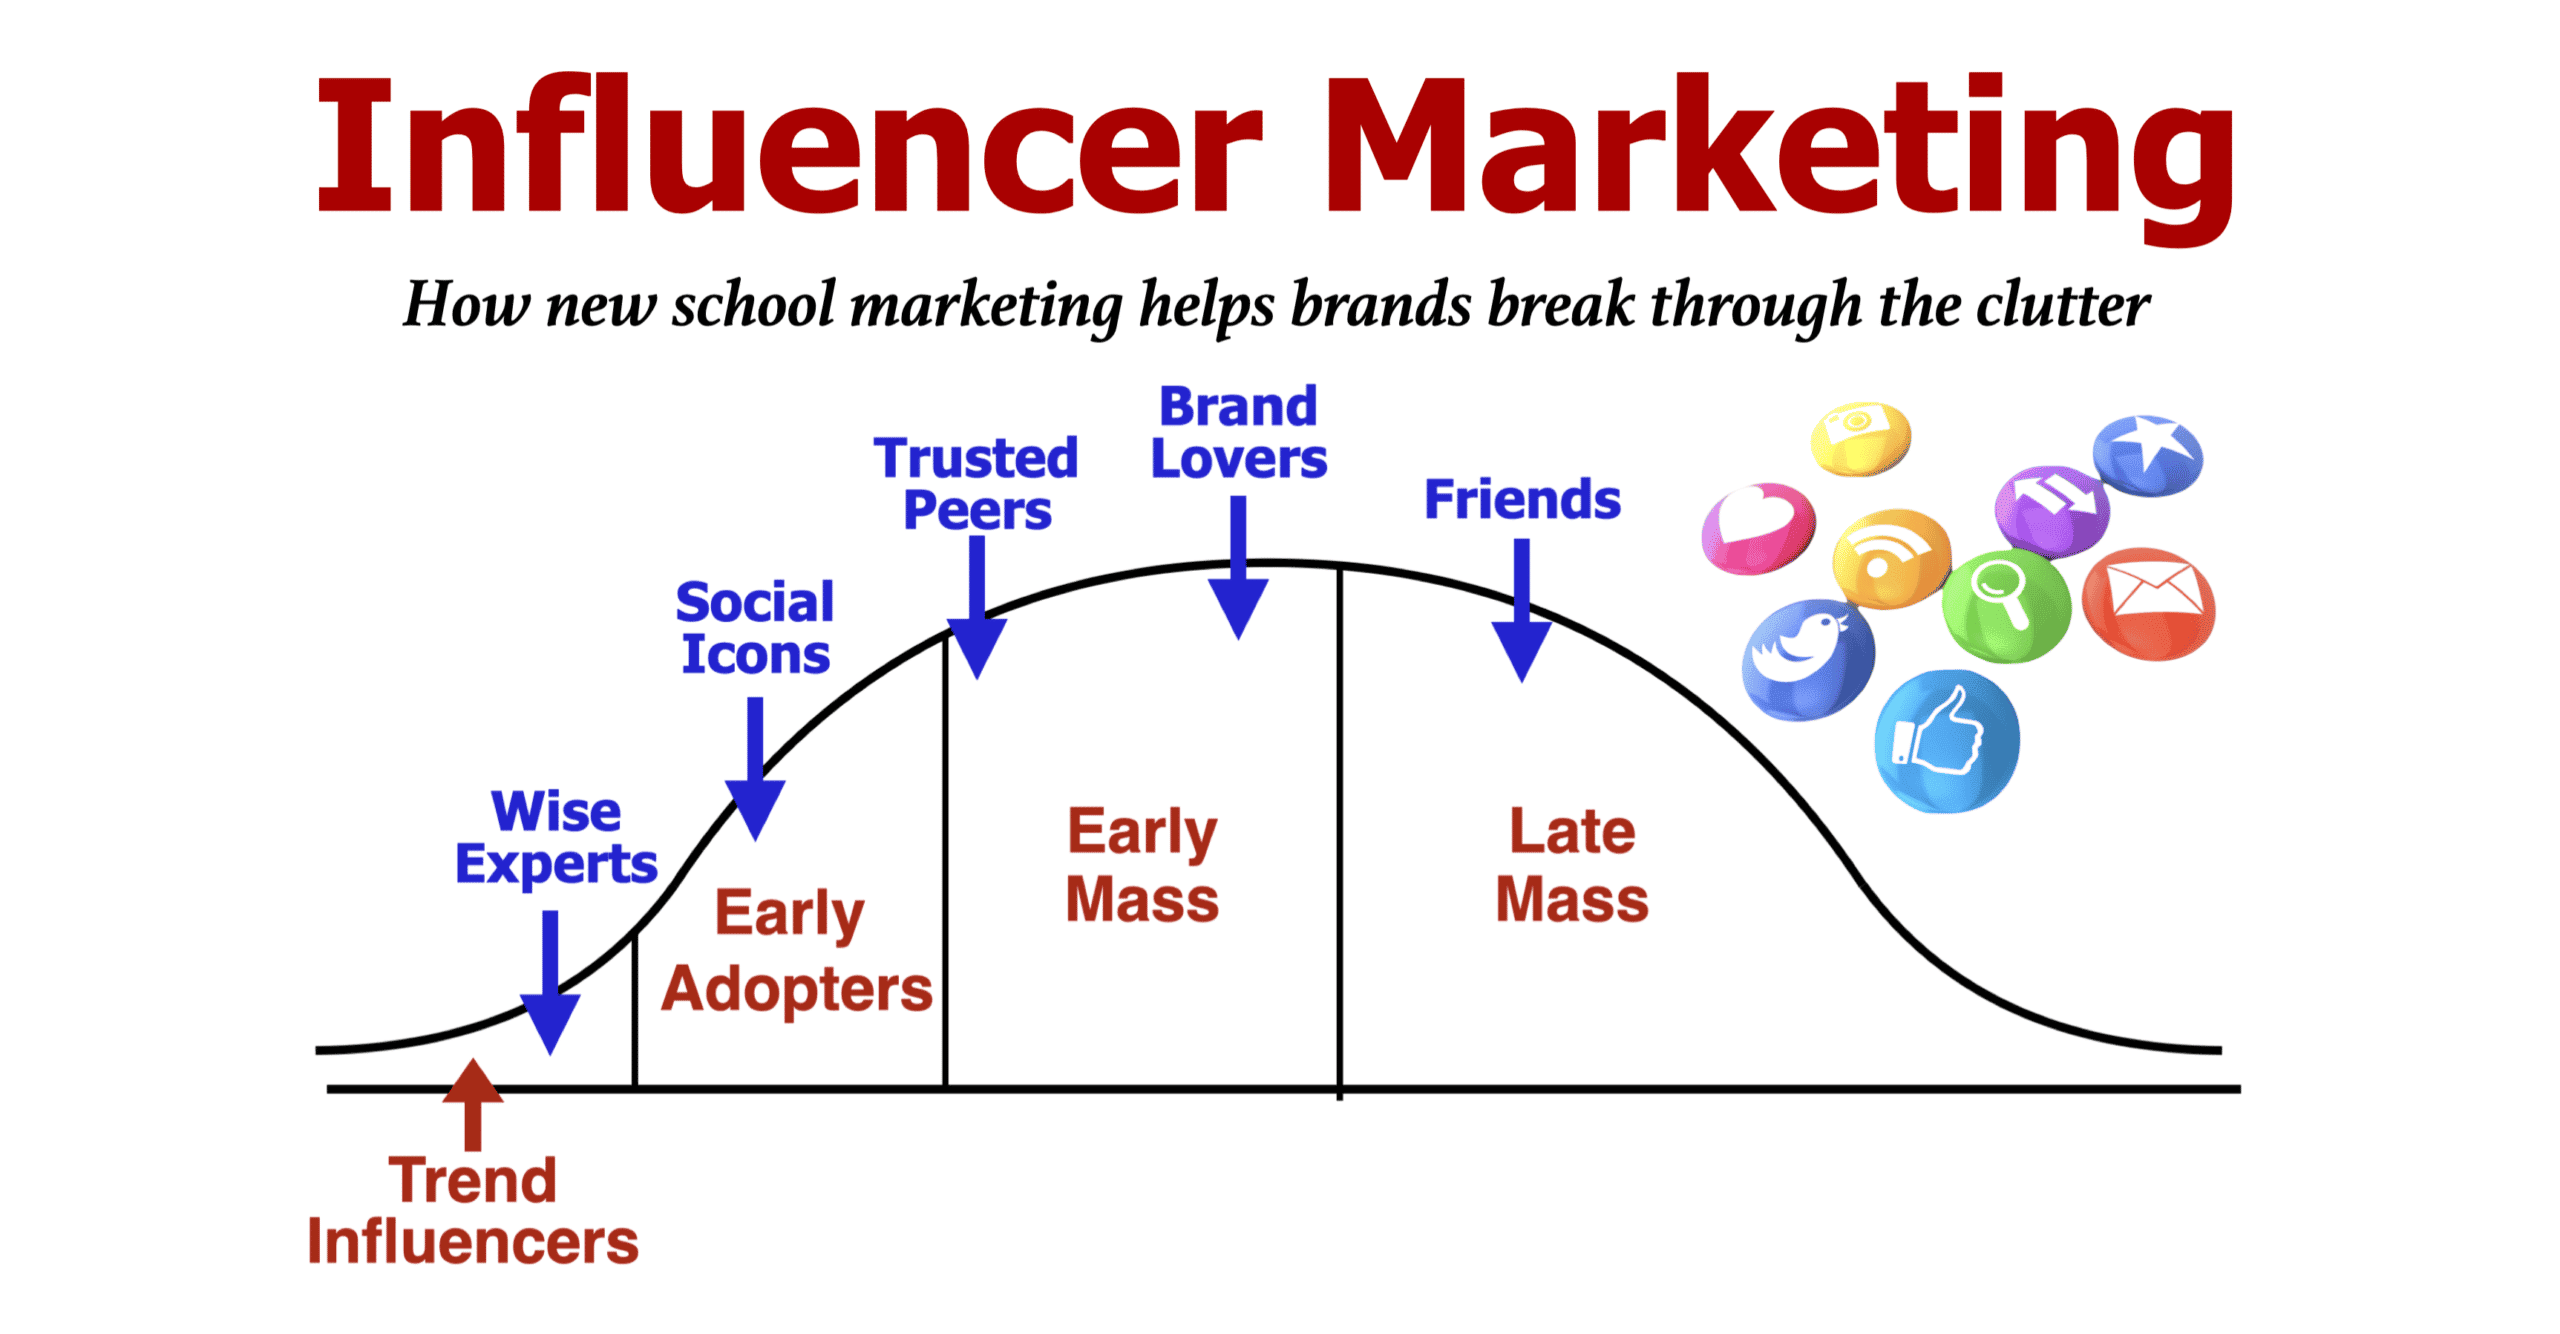 Small Budget, Big Impact: My Guide to Cost-effective Influencer Marketing